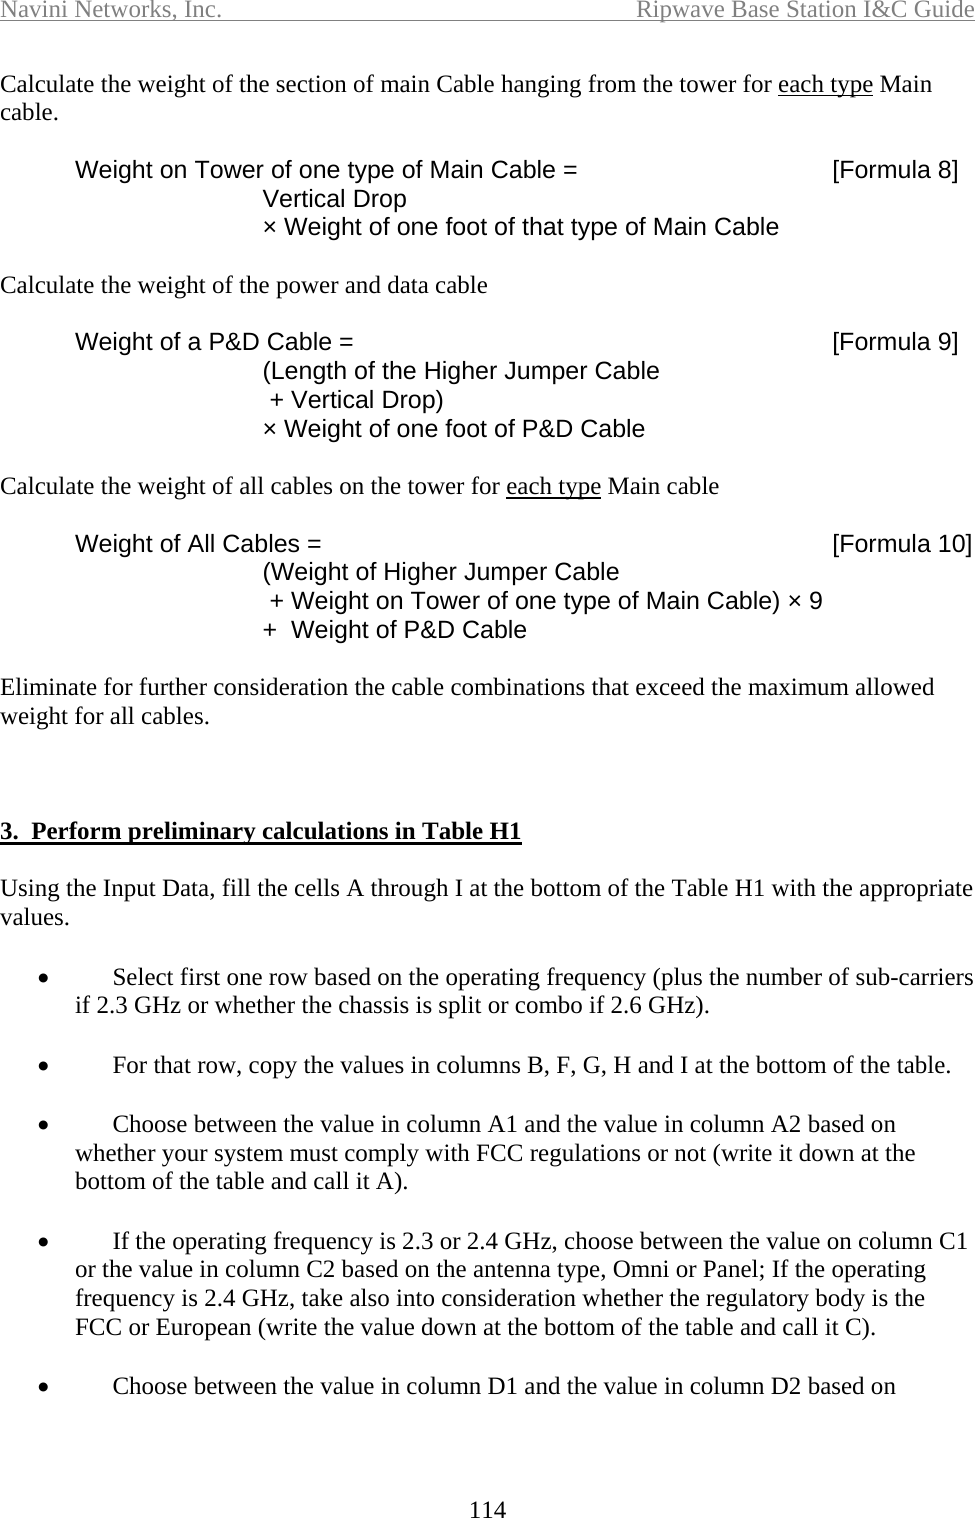 Navini Networks, Inc.  Ripwave Base Station I&amp;C Guide  114 Calculate the weight of the section of main Cable hanging from the tower for each type Main cable.    Weight on Tower of one type of Main Cable =   [Formula 8]     Vertical Drop      × Weight of one foot of that type of Main Cable    Calculate the weight of the power and data cable    Weight of a P&amp;D Cable =   [Formula 9]     (Length of the Higher Jumper Cable      + Vertical Drop)      × Weight of one foot of P&amp;D Cable  Calculate the weight of all cables on the tower for each type Main cable    Weight of All Cables =   [Formula 10]     (Weight of Higher Jumper Cable      + Weight on Tower of one type of Main Cable) × 9     +  Weight of P&amp;D Cable  Eliminate for further consideration the cable combinations that exceed the maximum allowed weight for all cables.      3.  Perform preliminary calculations in Table H1  Using the Input Data, fill the cells A through I at the bottom of the Table H1 with the appropriate values.  •  Select first one row based on the operating frequency (plus the number of sub-carriers if 2.3 GHz or whether the chassis is split or combo if 2.6 GHz).   •  For that row, copy the values in columns B, F, G, H and I at the bottom of the table.  •  Choose between the value in column A1 and the value in column A2 based on whether your system must comply with FCC regulations or not (write it down at the bottom of the table and call it A).  •  If the operating frequency is 2.3 or 2.4 GHz, choose between the value on column C1 or the value in column C2 based on the antenna type, Omni or Panel; If the operating frequency is 2.4 GHz, take also into consideration whether the regulatory body is the FCC or European (write the value down at the bottom of the table and call it C).  •  Choose between the value in column D1 and the value in column D2 based on 